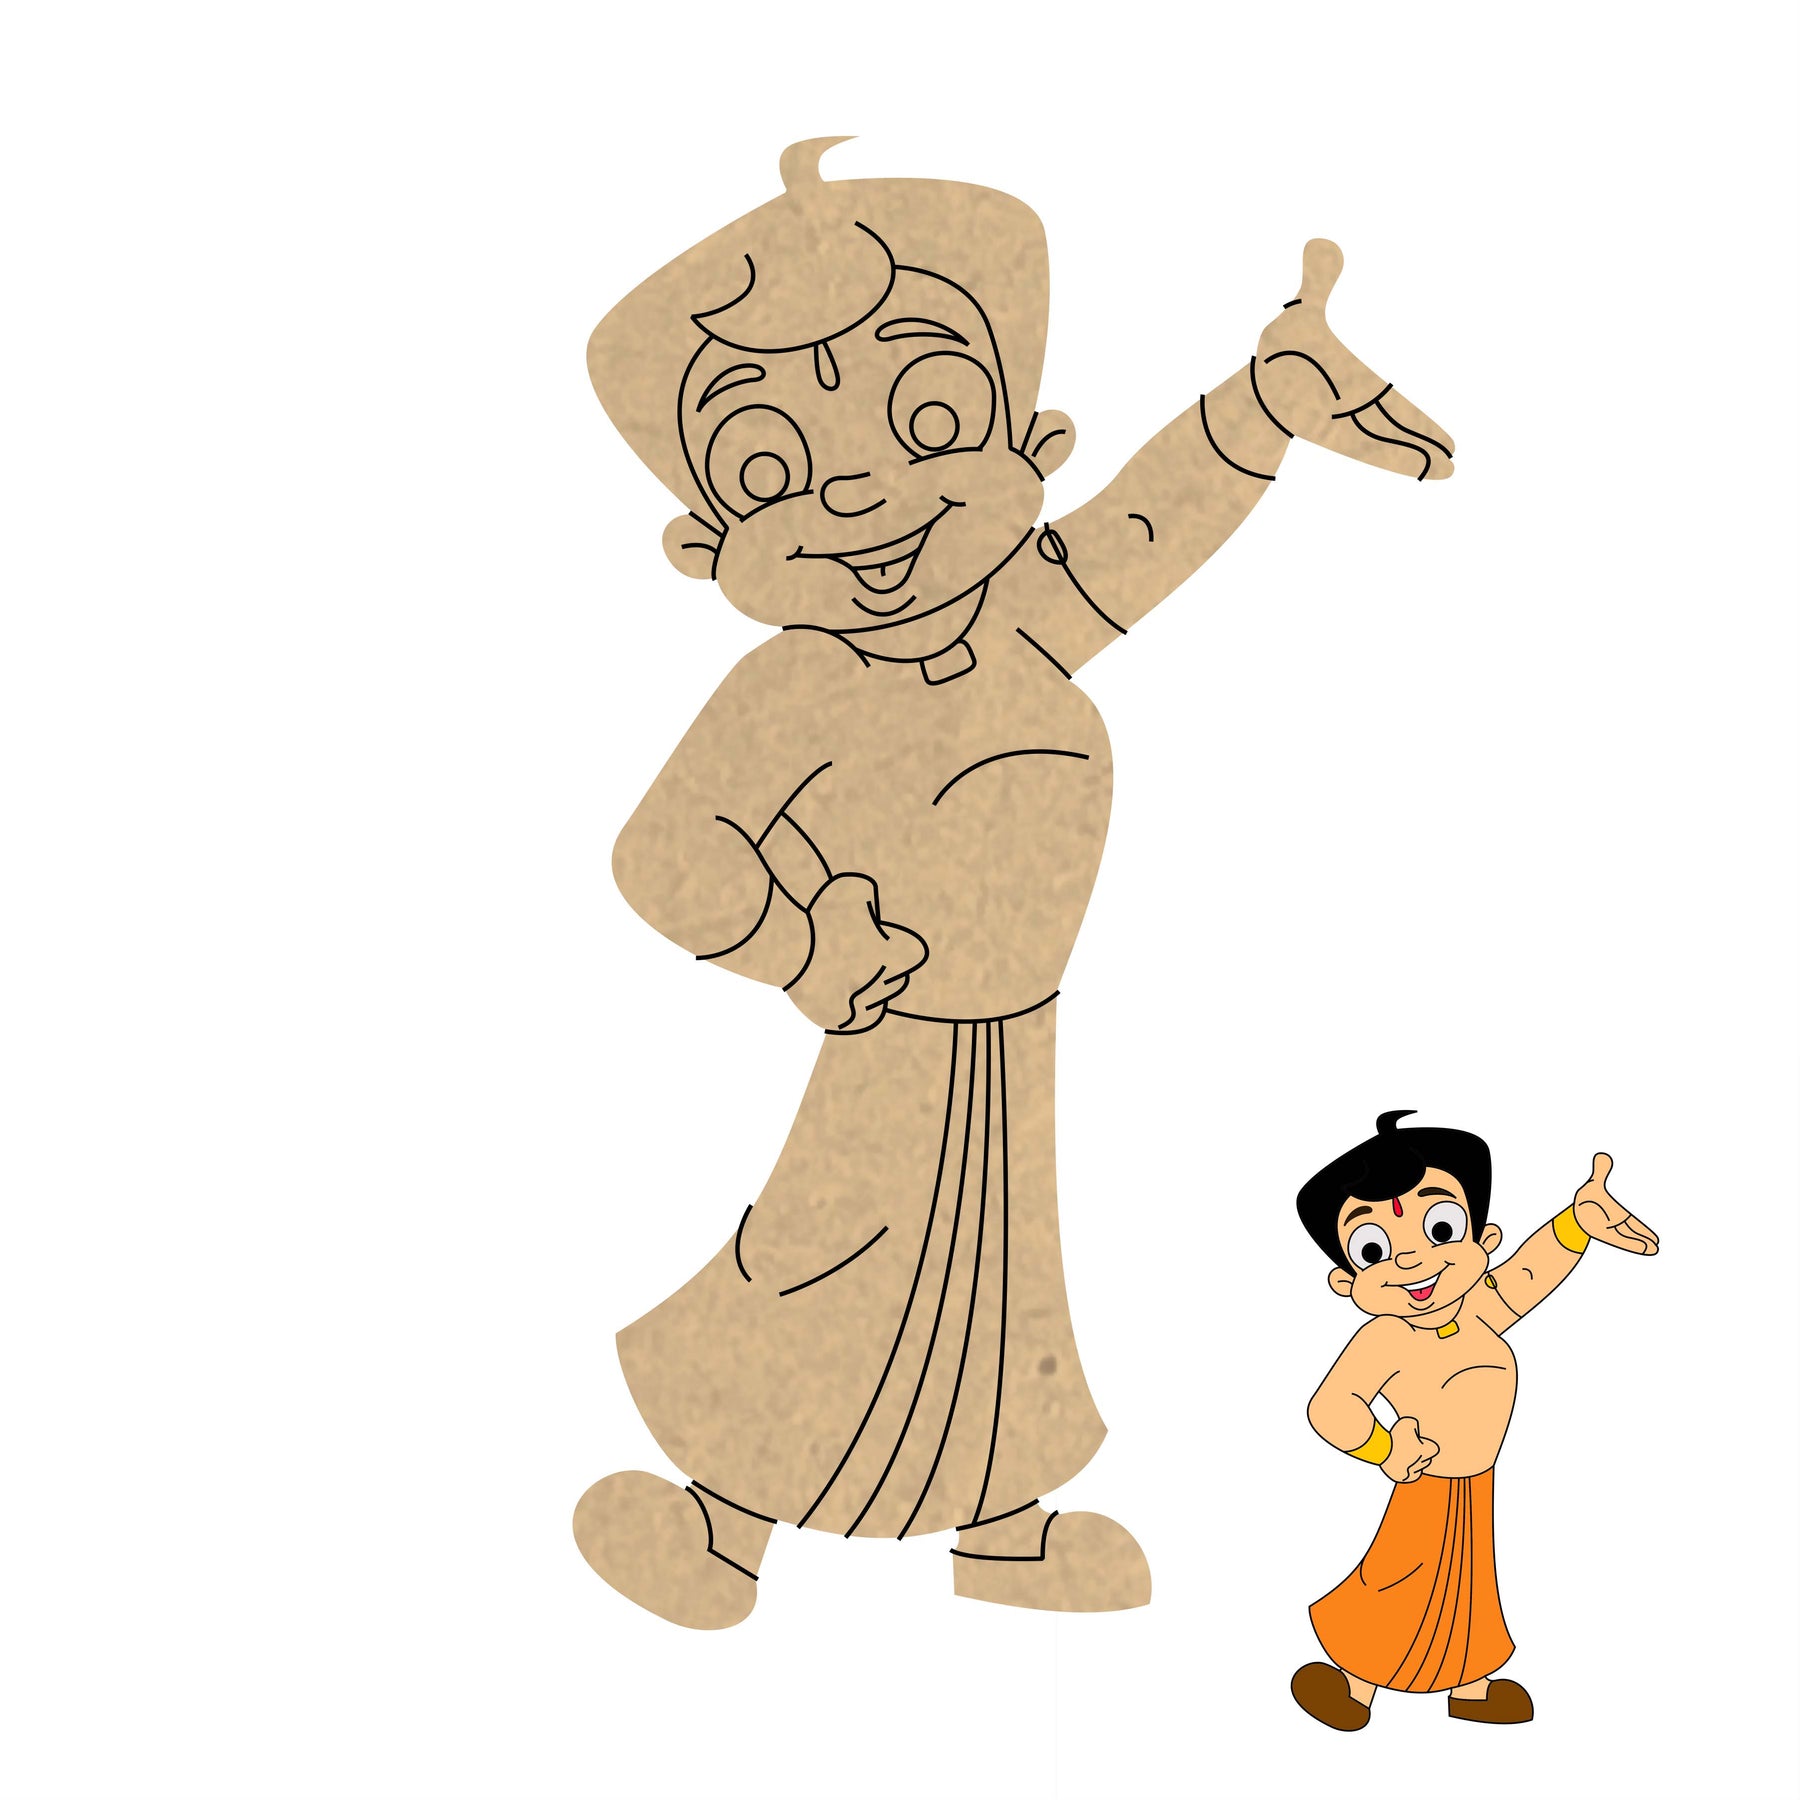 Chhota Bheem/ Dragonfly Participate in FREE DRAWING COMPETITION (choose 1  draw 1)